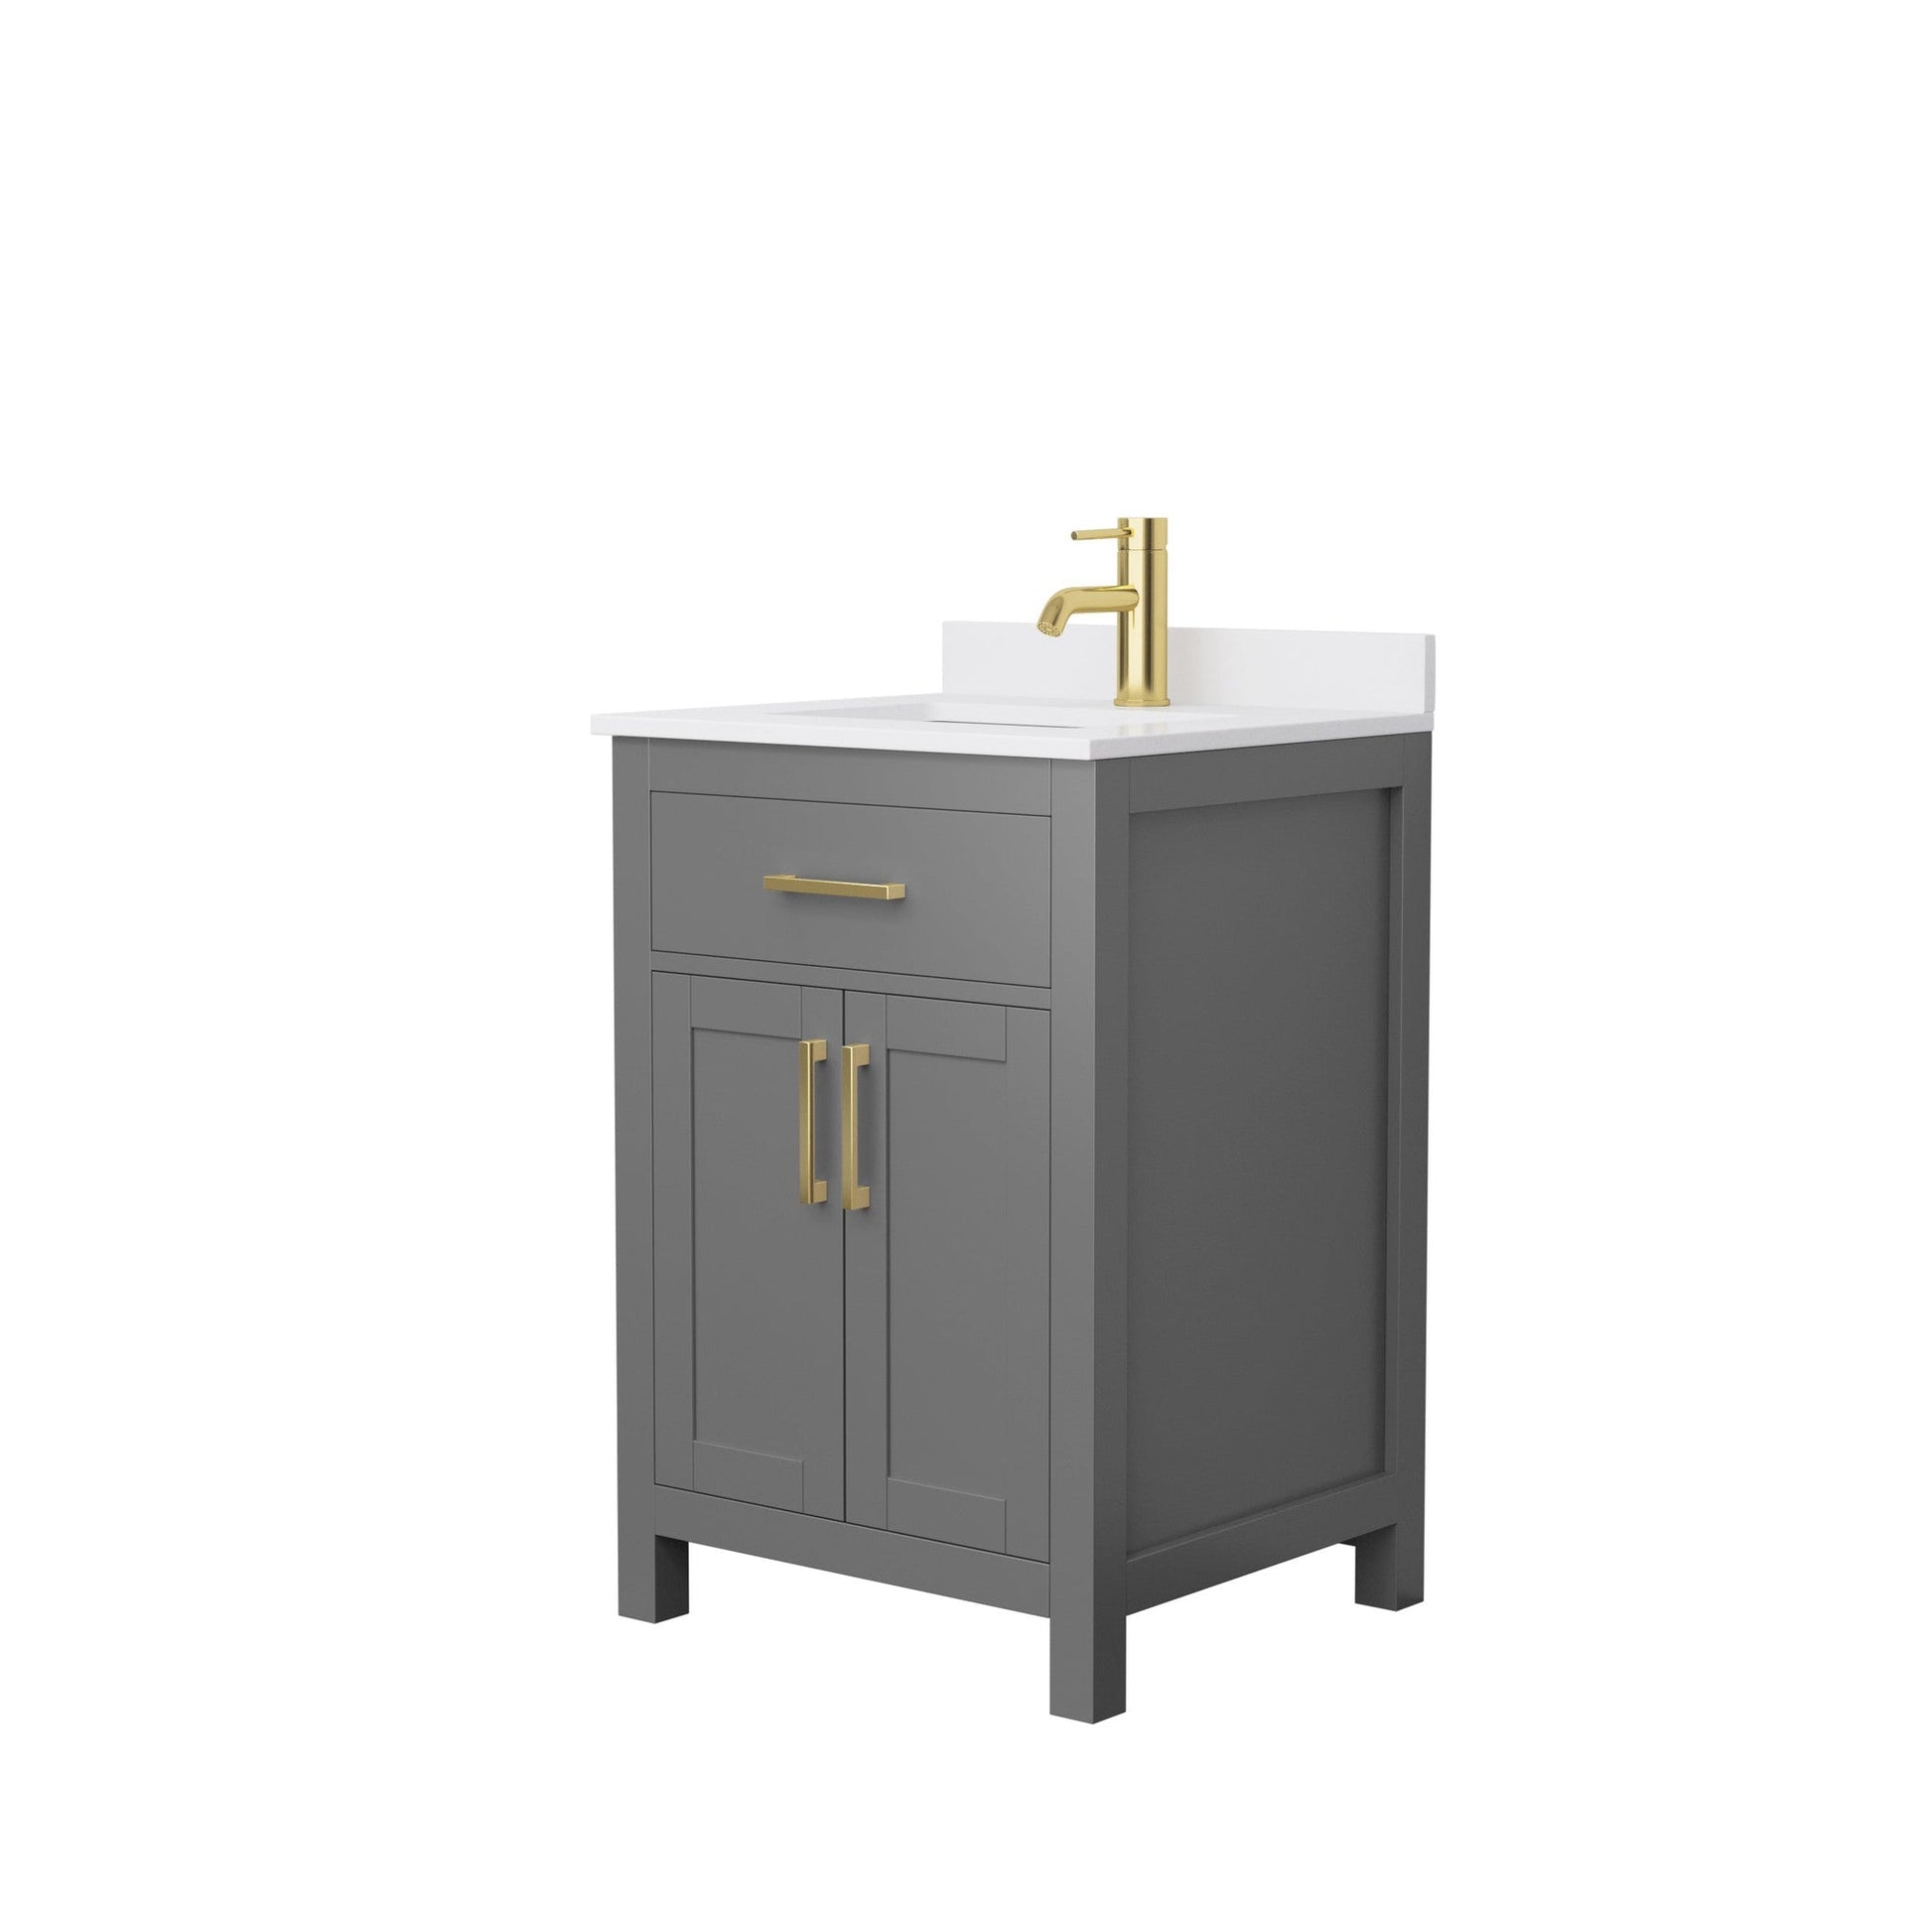 Beckett 24" Single Bathroom Vanity in Dark Gray, White Cultured Marble Countertop, Undermount Square Sink, Brushed Gold Trim